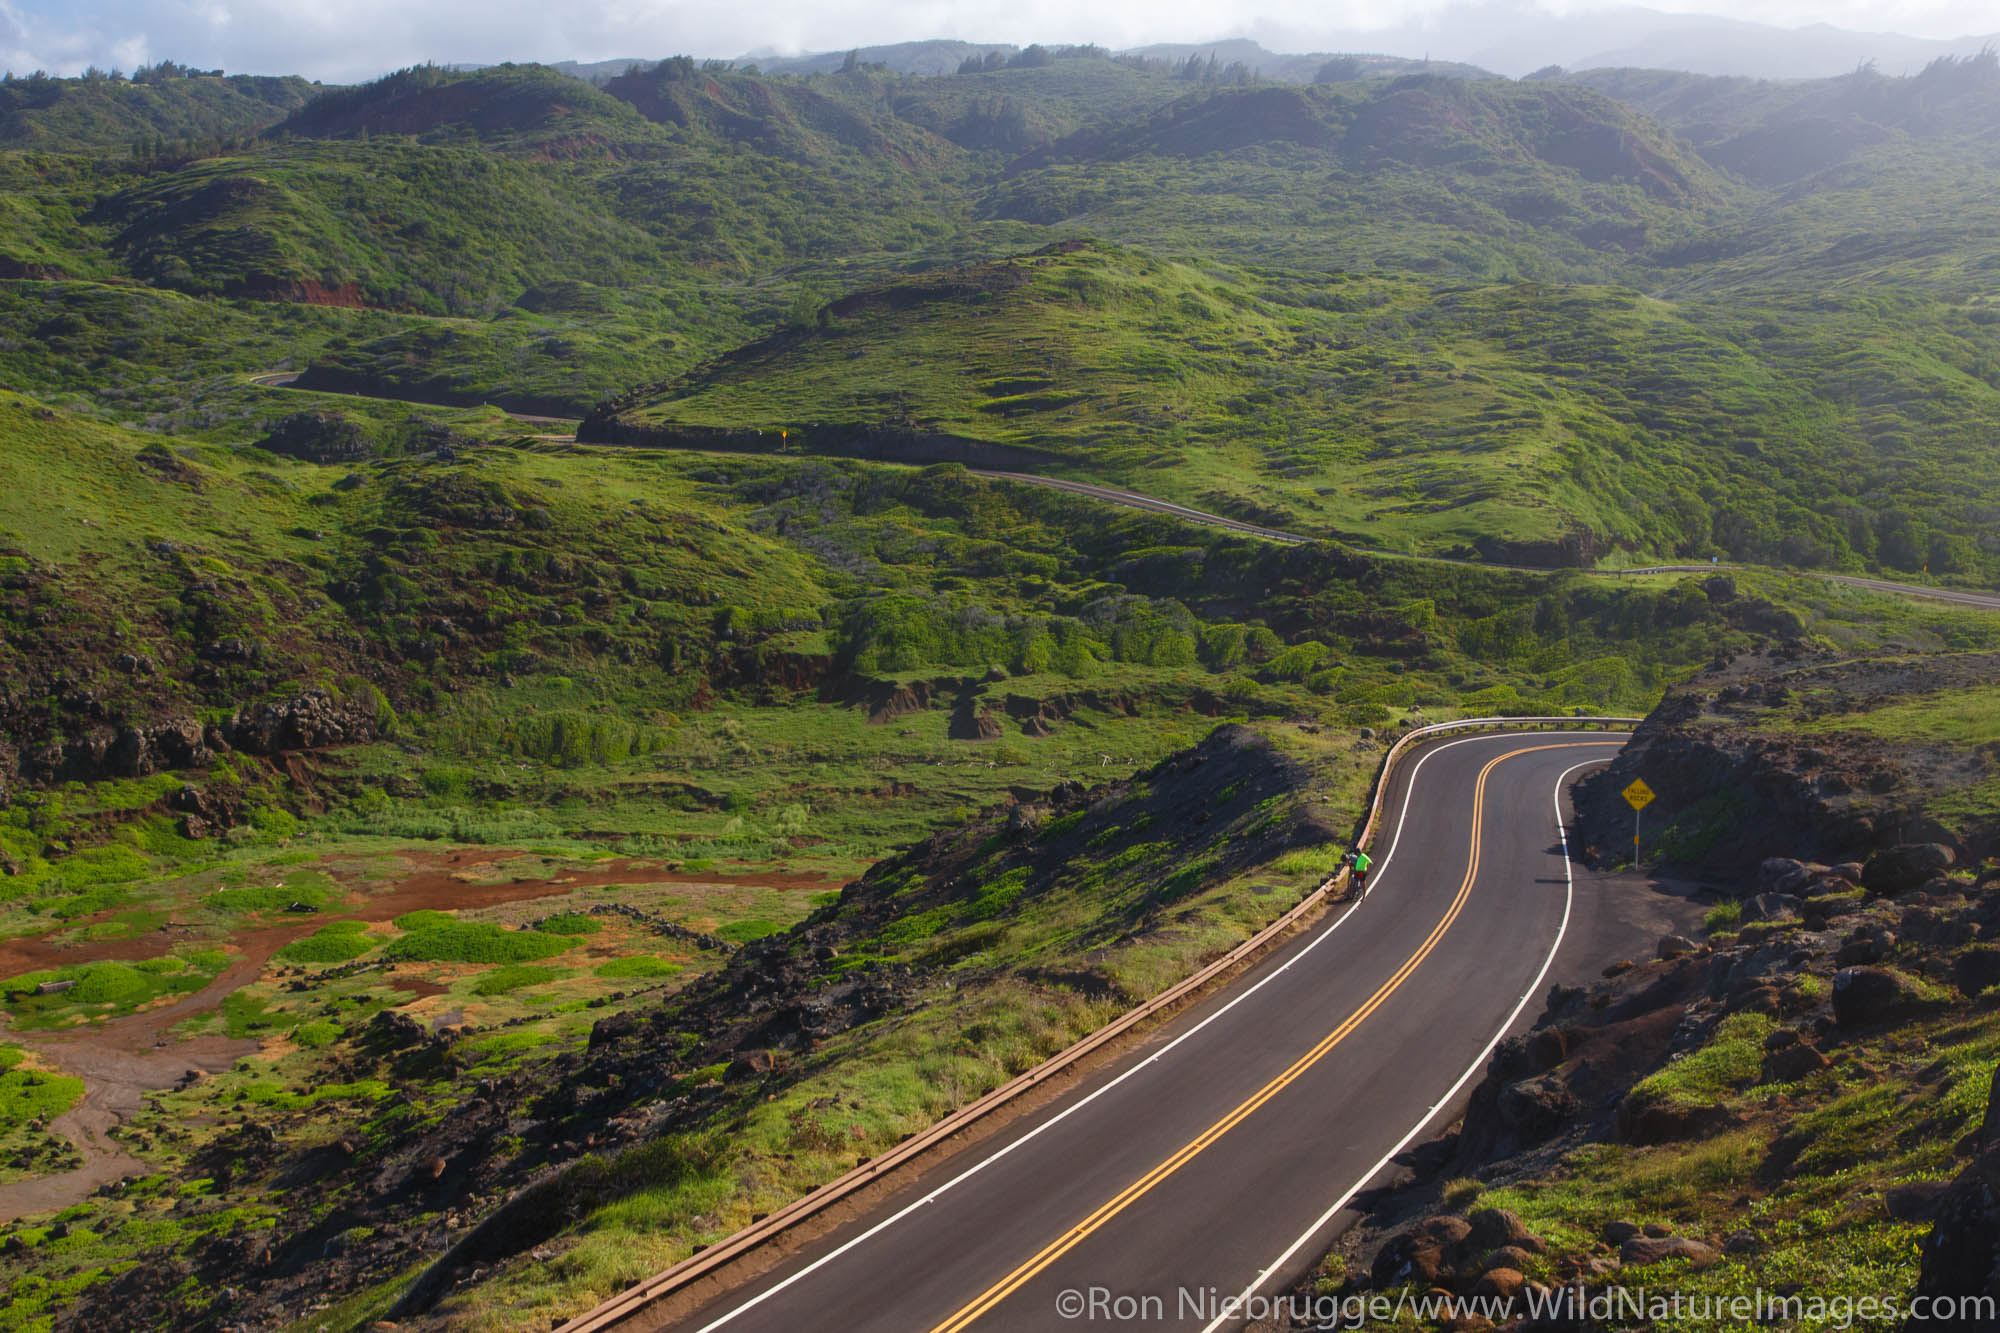 The road along the North end of Maui, Hawaii.